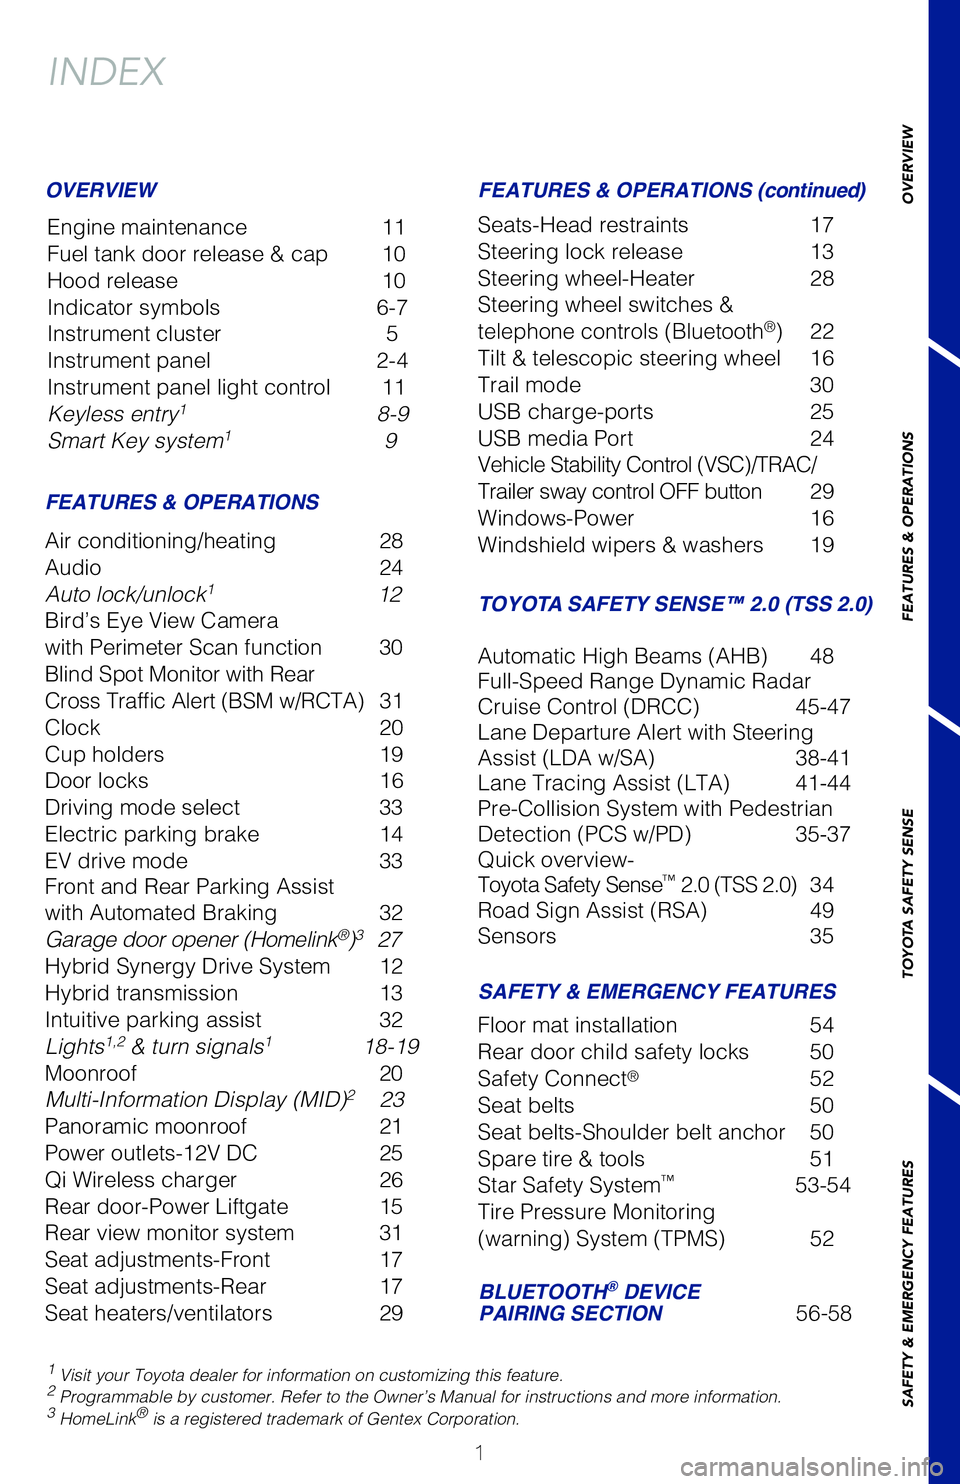 TOYOTA RAV4 HYBRID 2020  Owners Manual (in English) 1
OVERVIEW
FEATURES & OPERATIONS
TOYOTA SAFETY SENSE
SAFETY & EMERGENCY FEATURES
INDEX
Engine maintenance   11
Fuel tank door release & cap   10
Hood release   10
Indicator symbols   6-7
Instrument cl